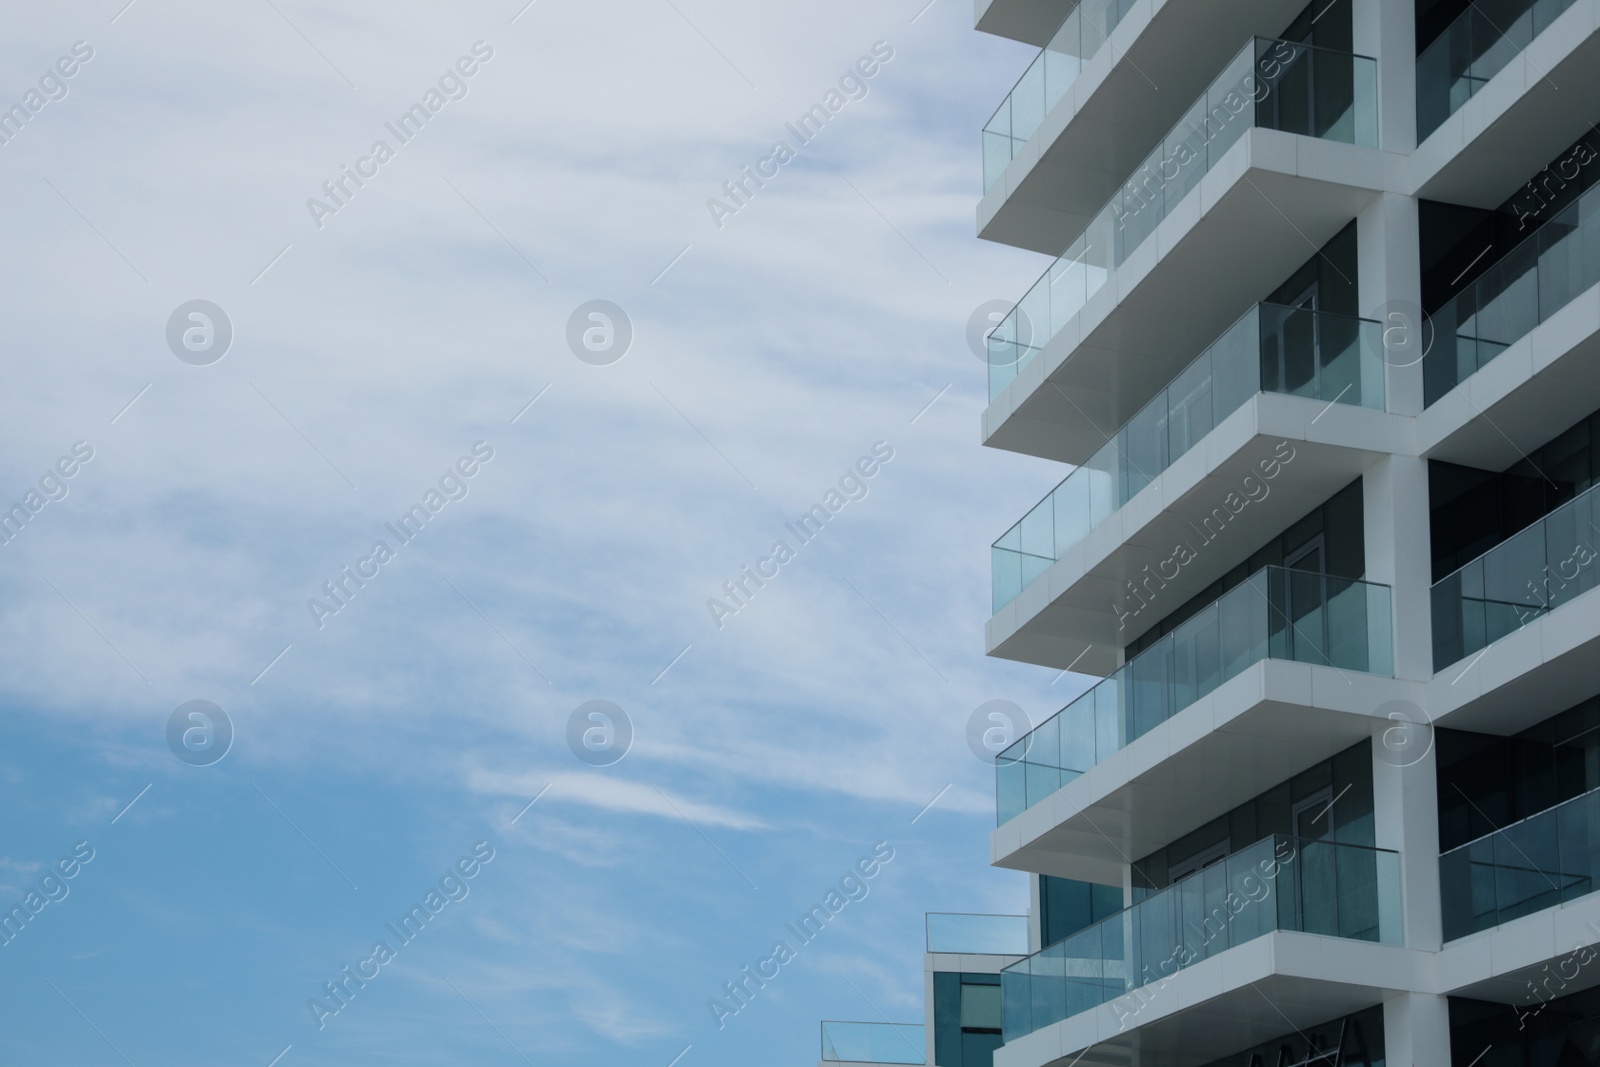 Photo of Exterior of residential building with balconies against blue sky, low angle view. Space for text